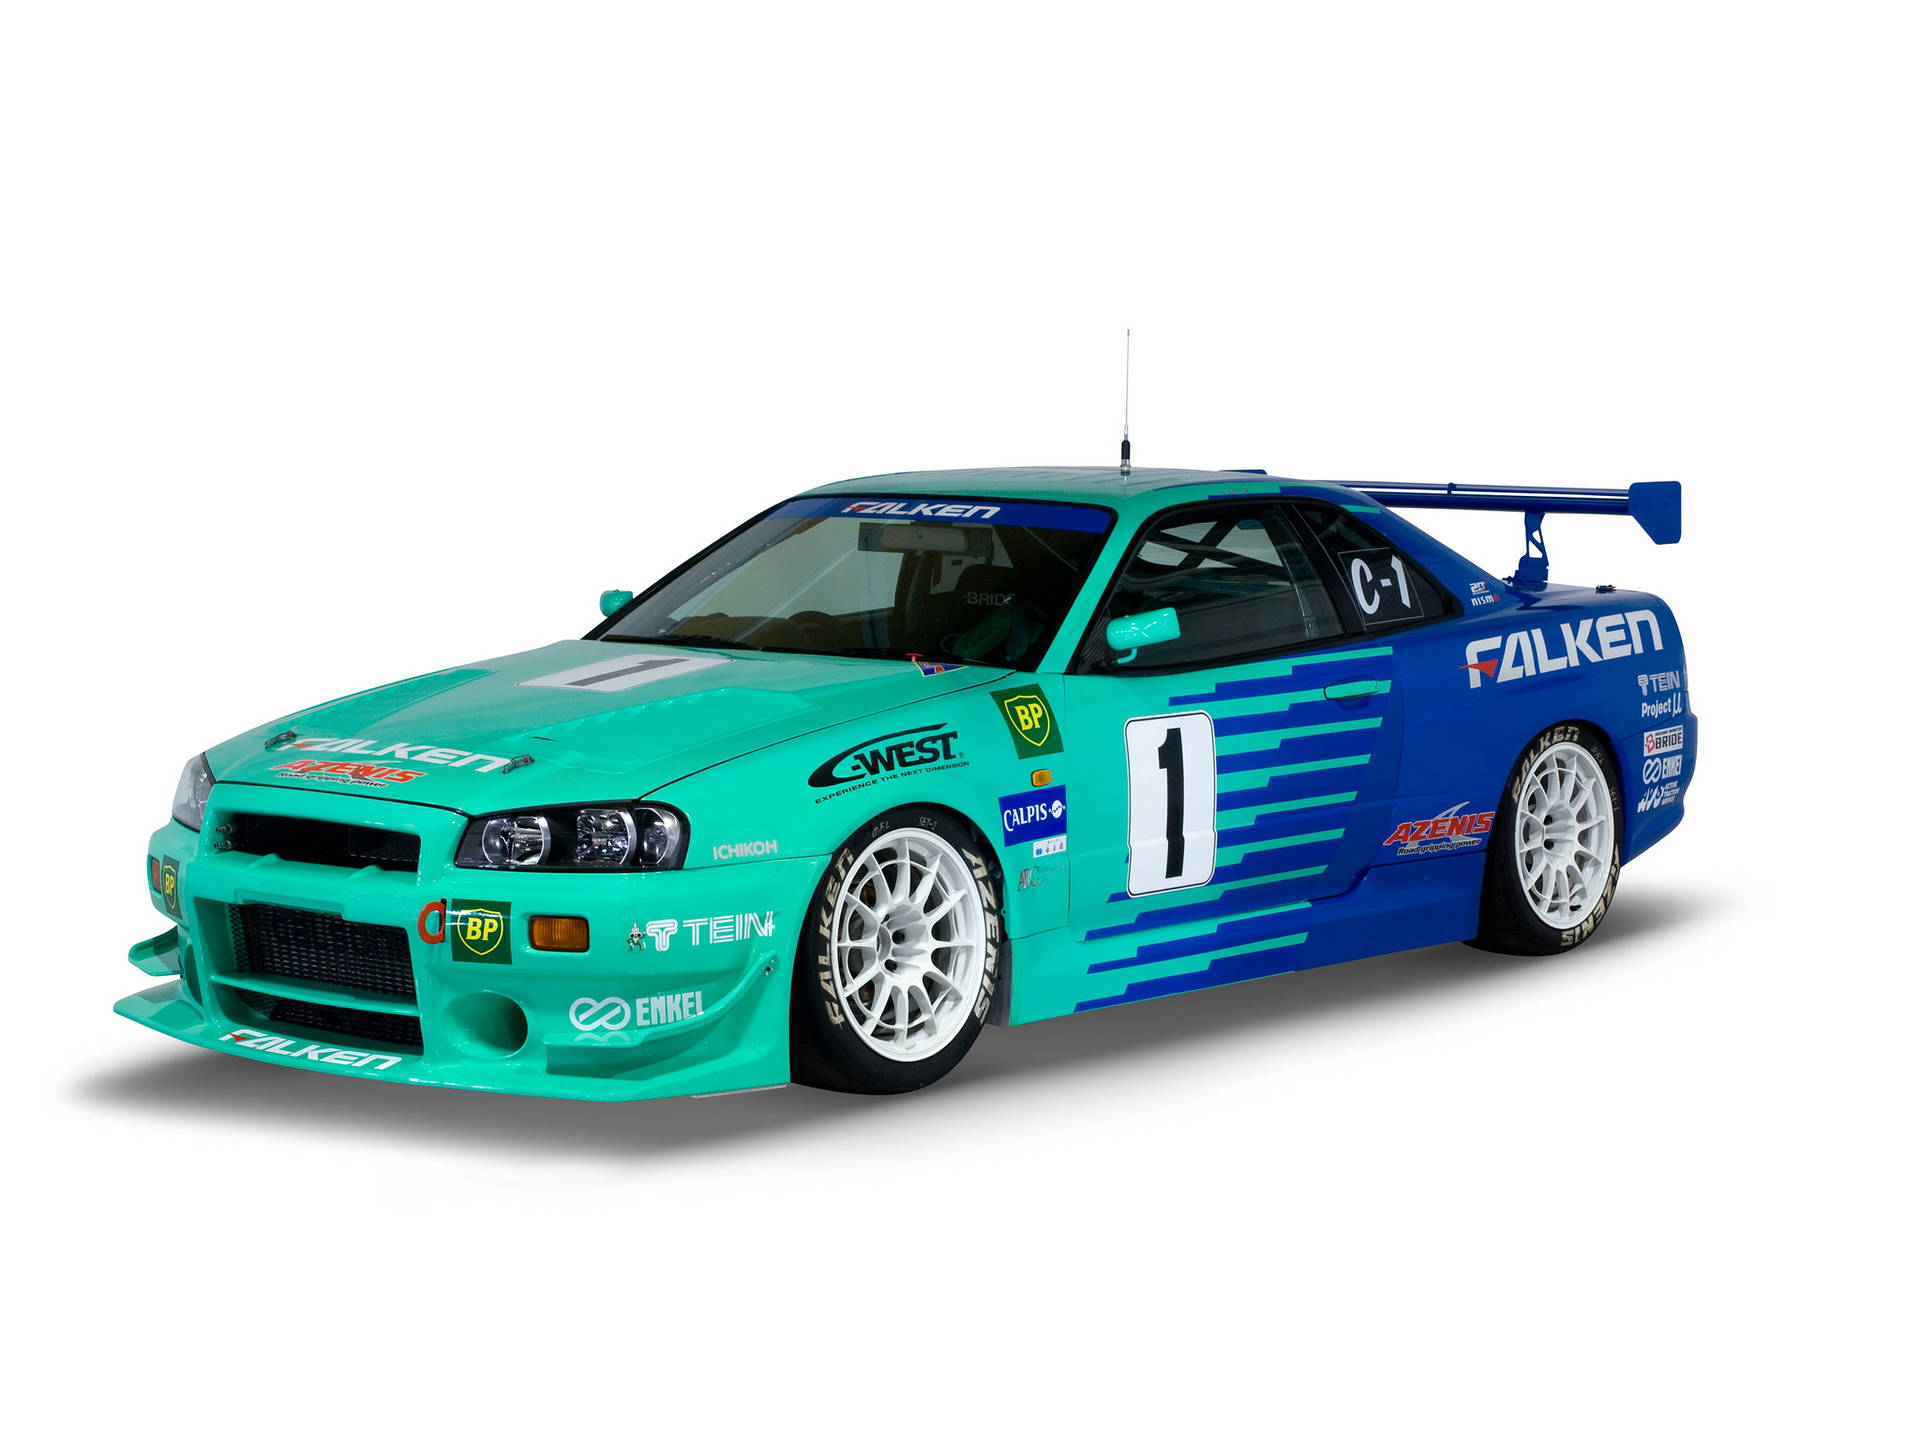 Mint Green And Blue Skyline Car Background